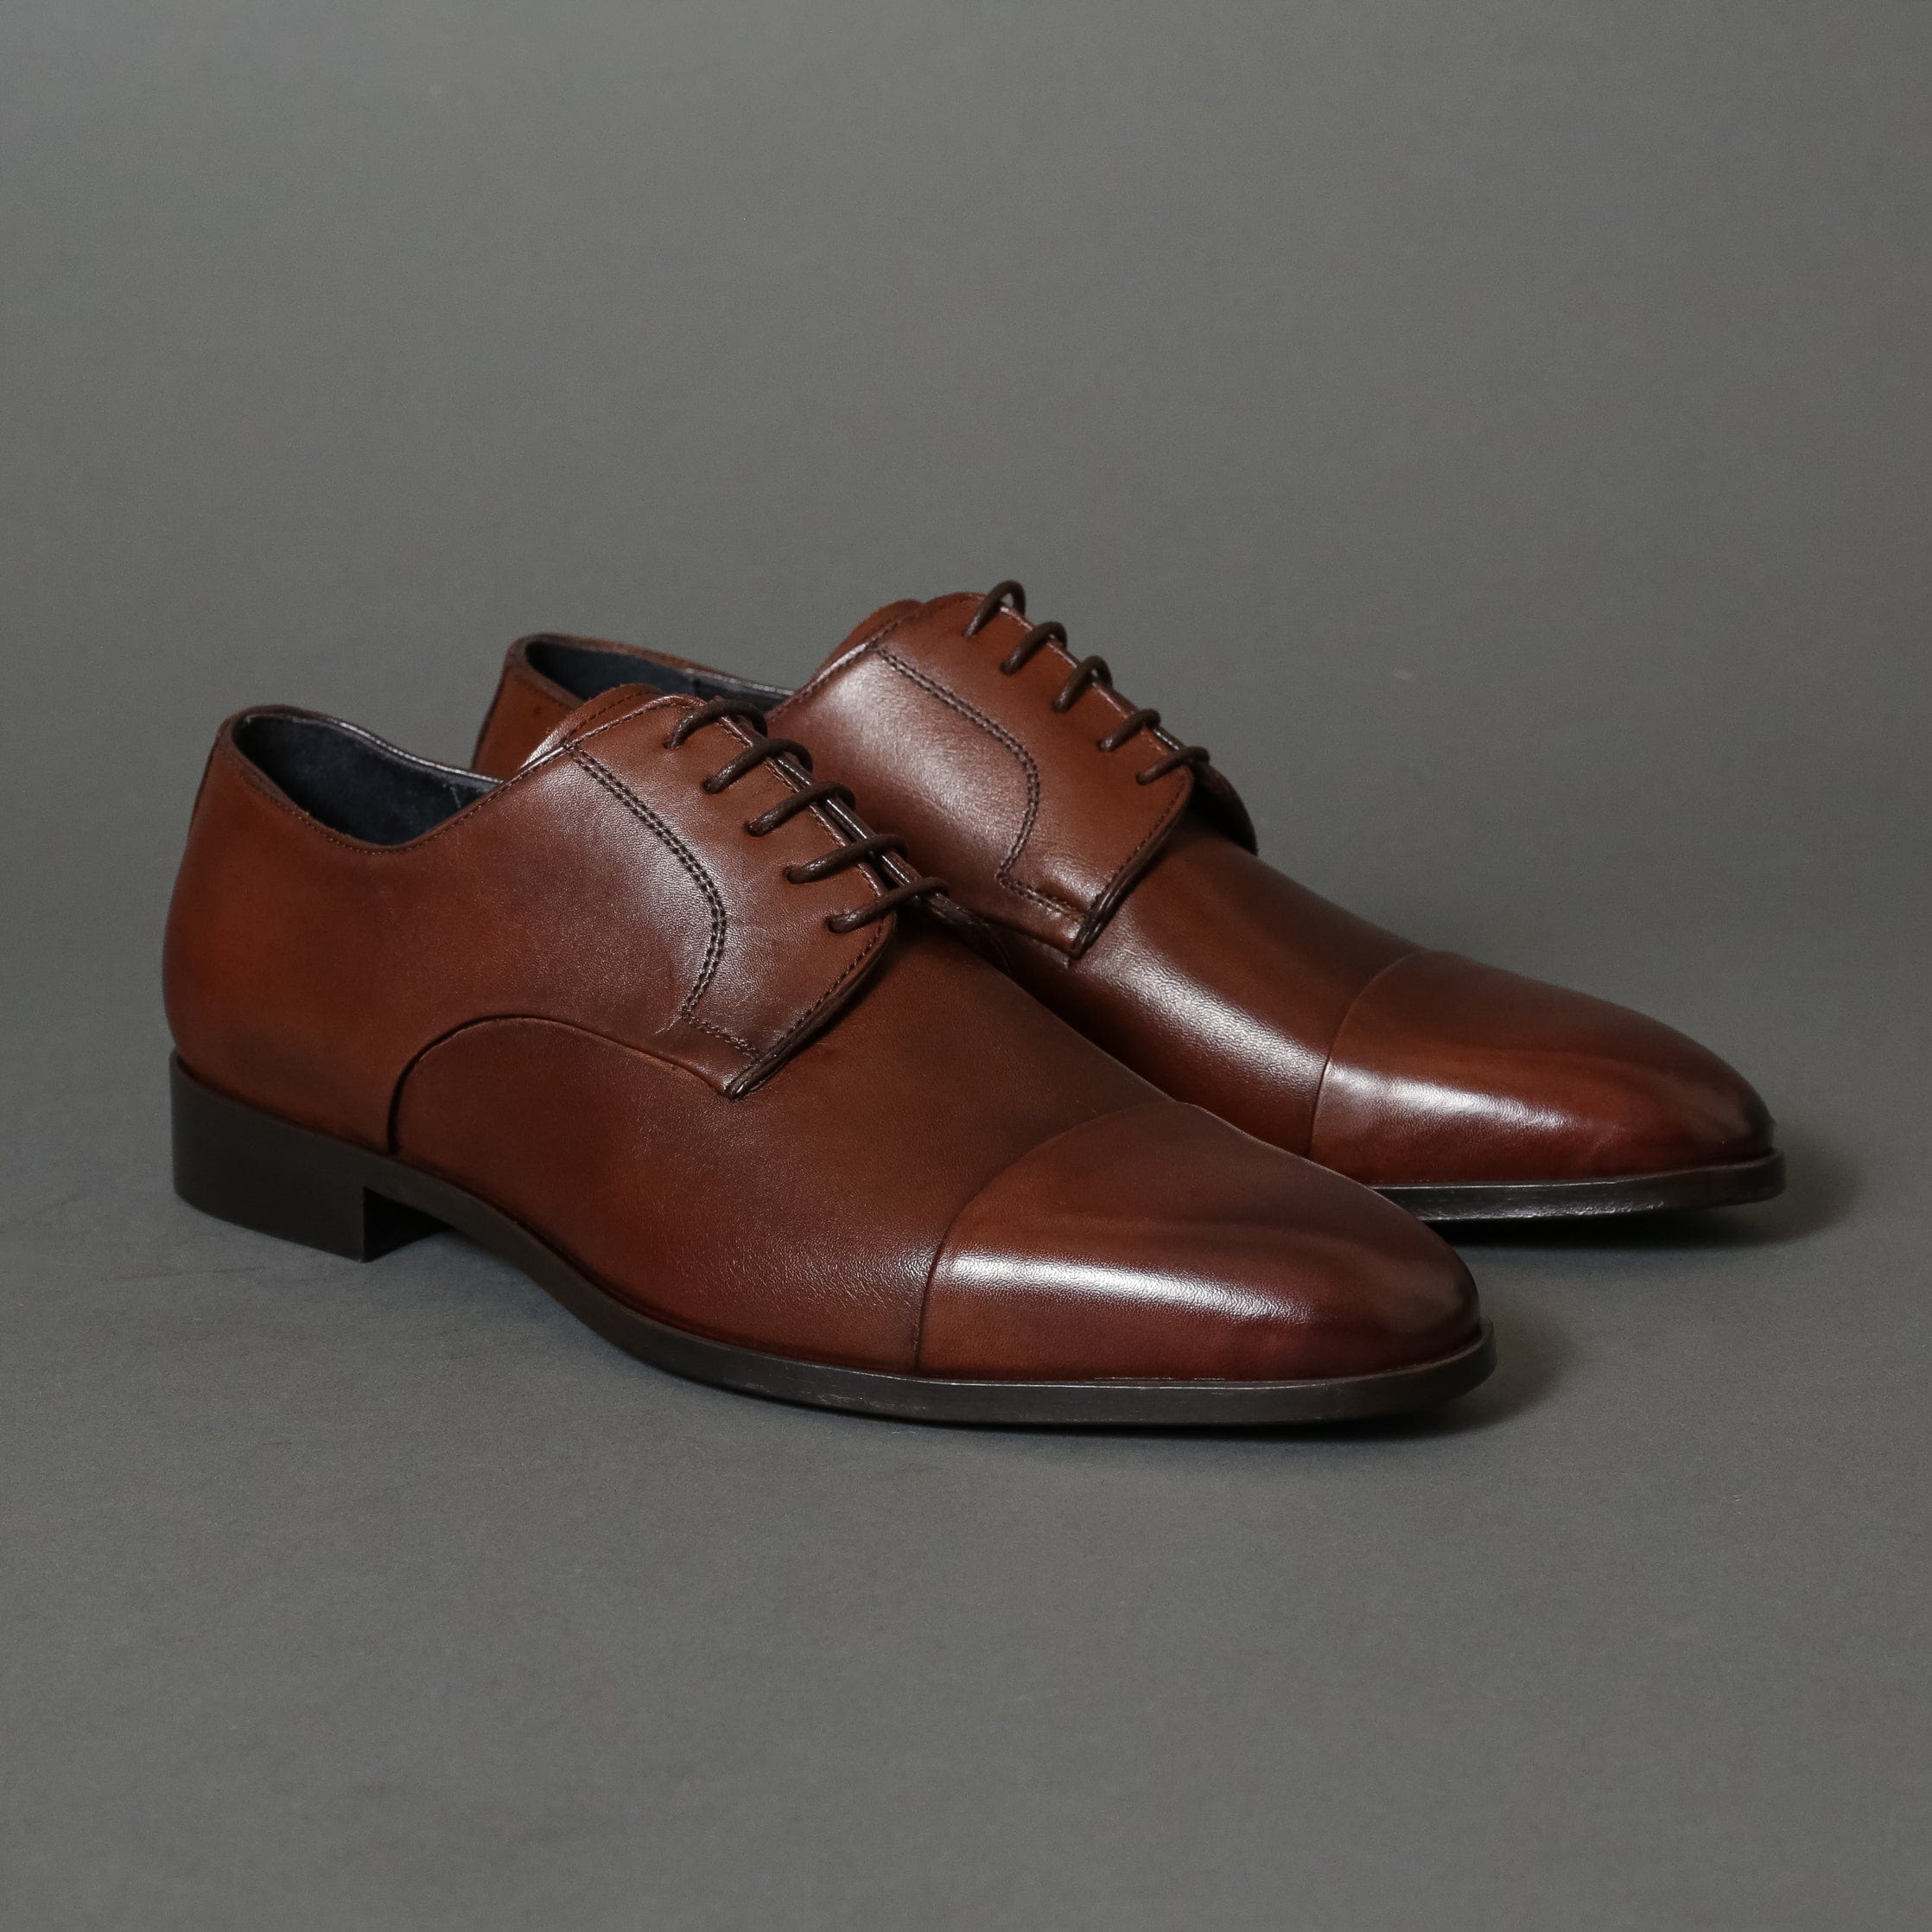 Conflict For Interest Lace Up Derby 800-2.0 Tabacco